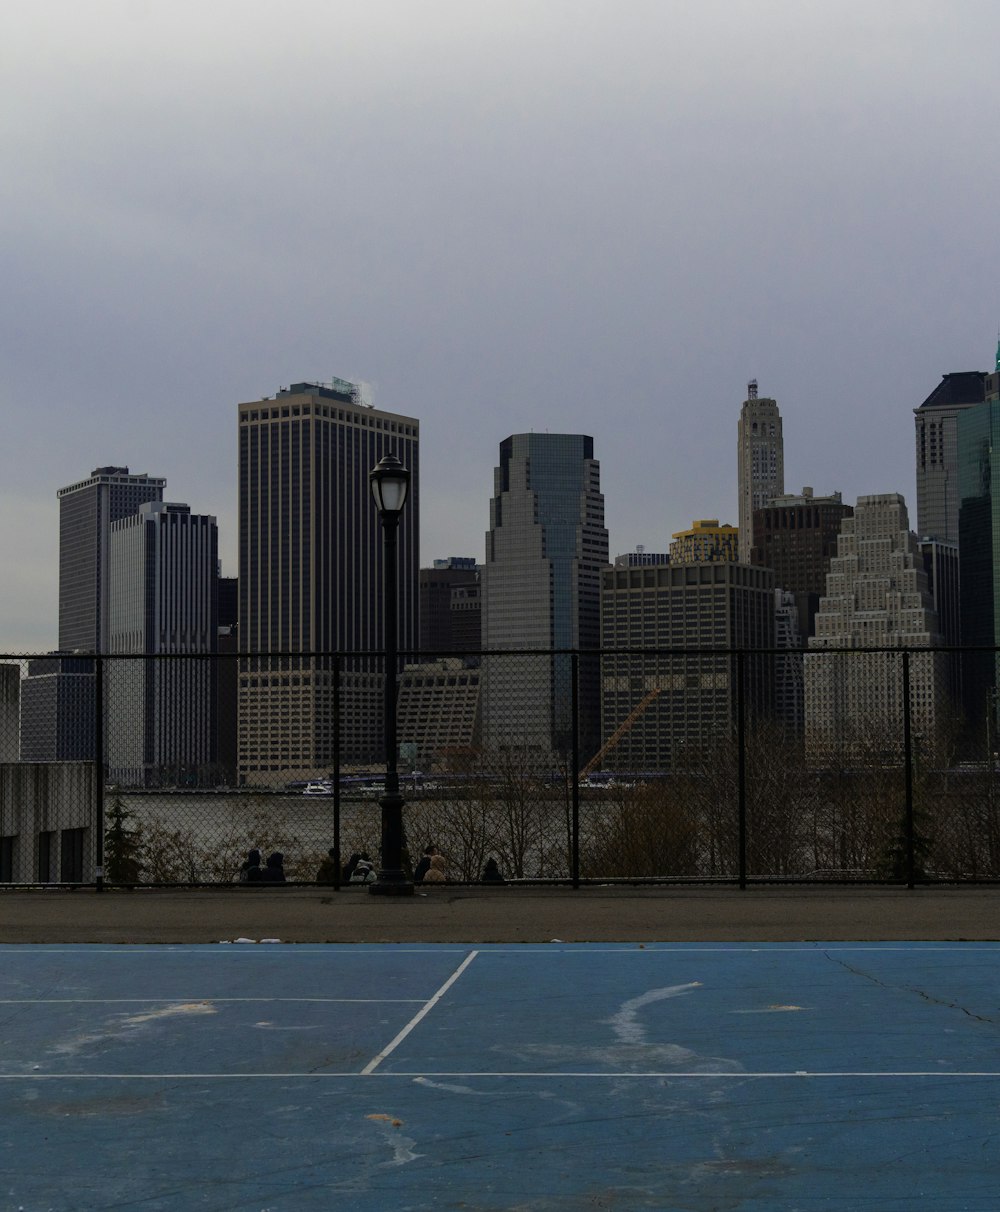 a tennis court with a city in the background